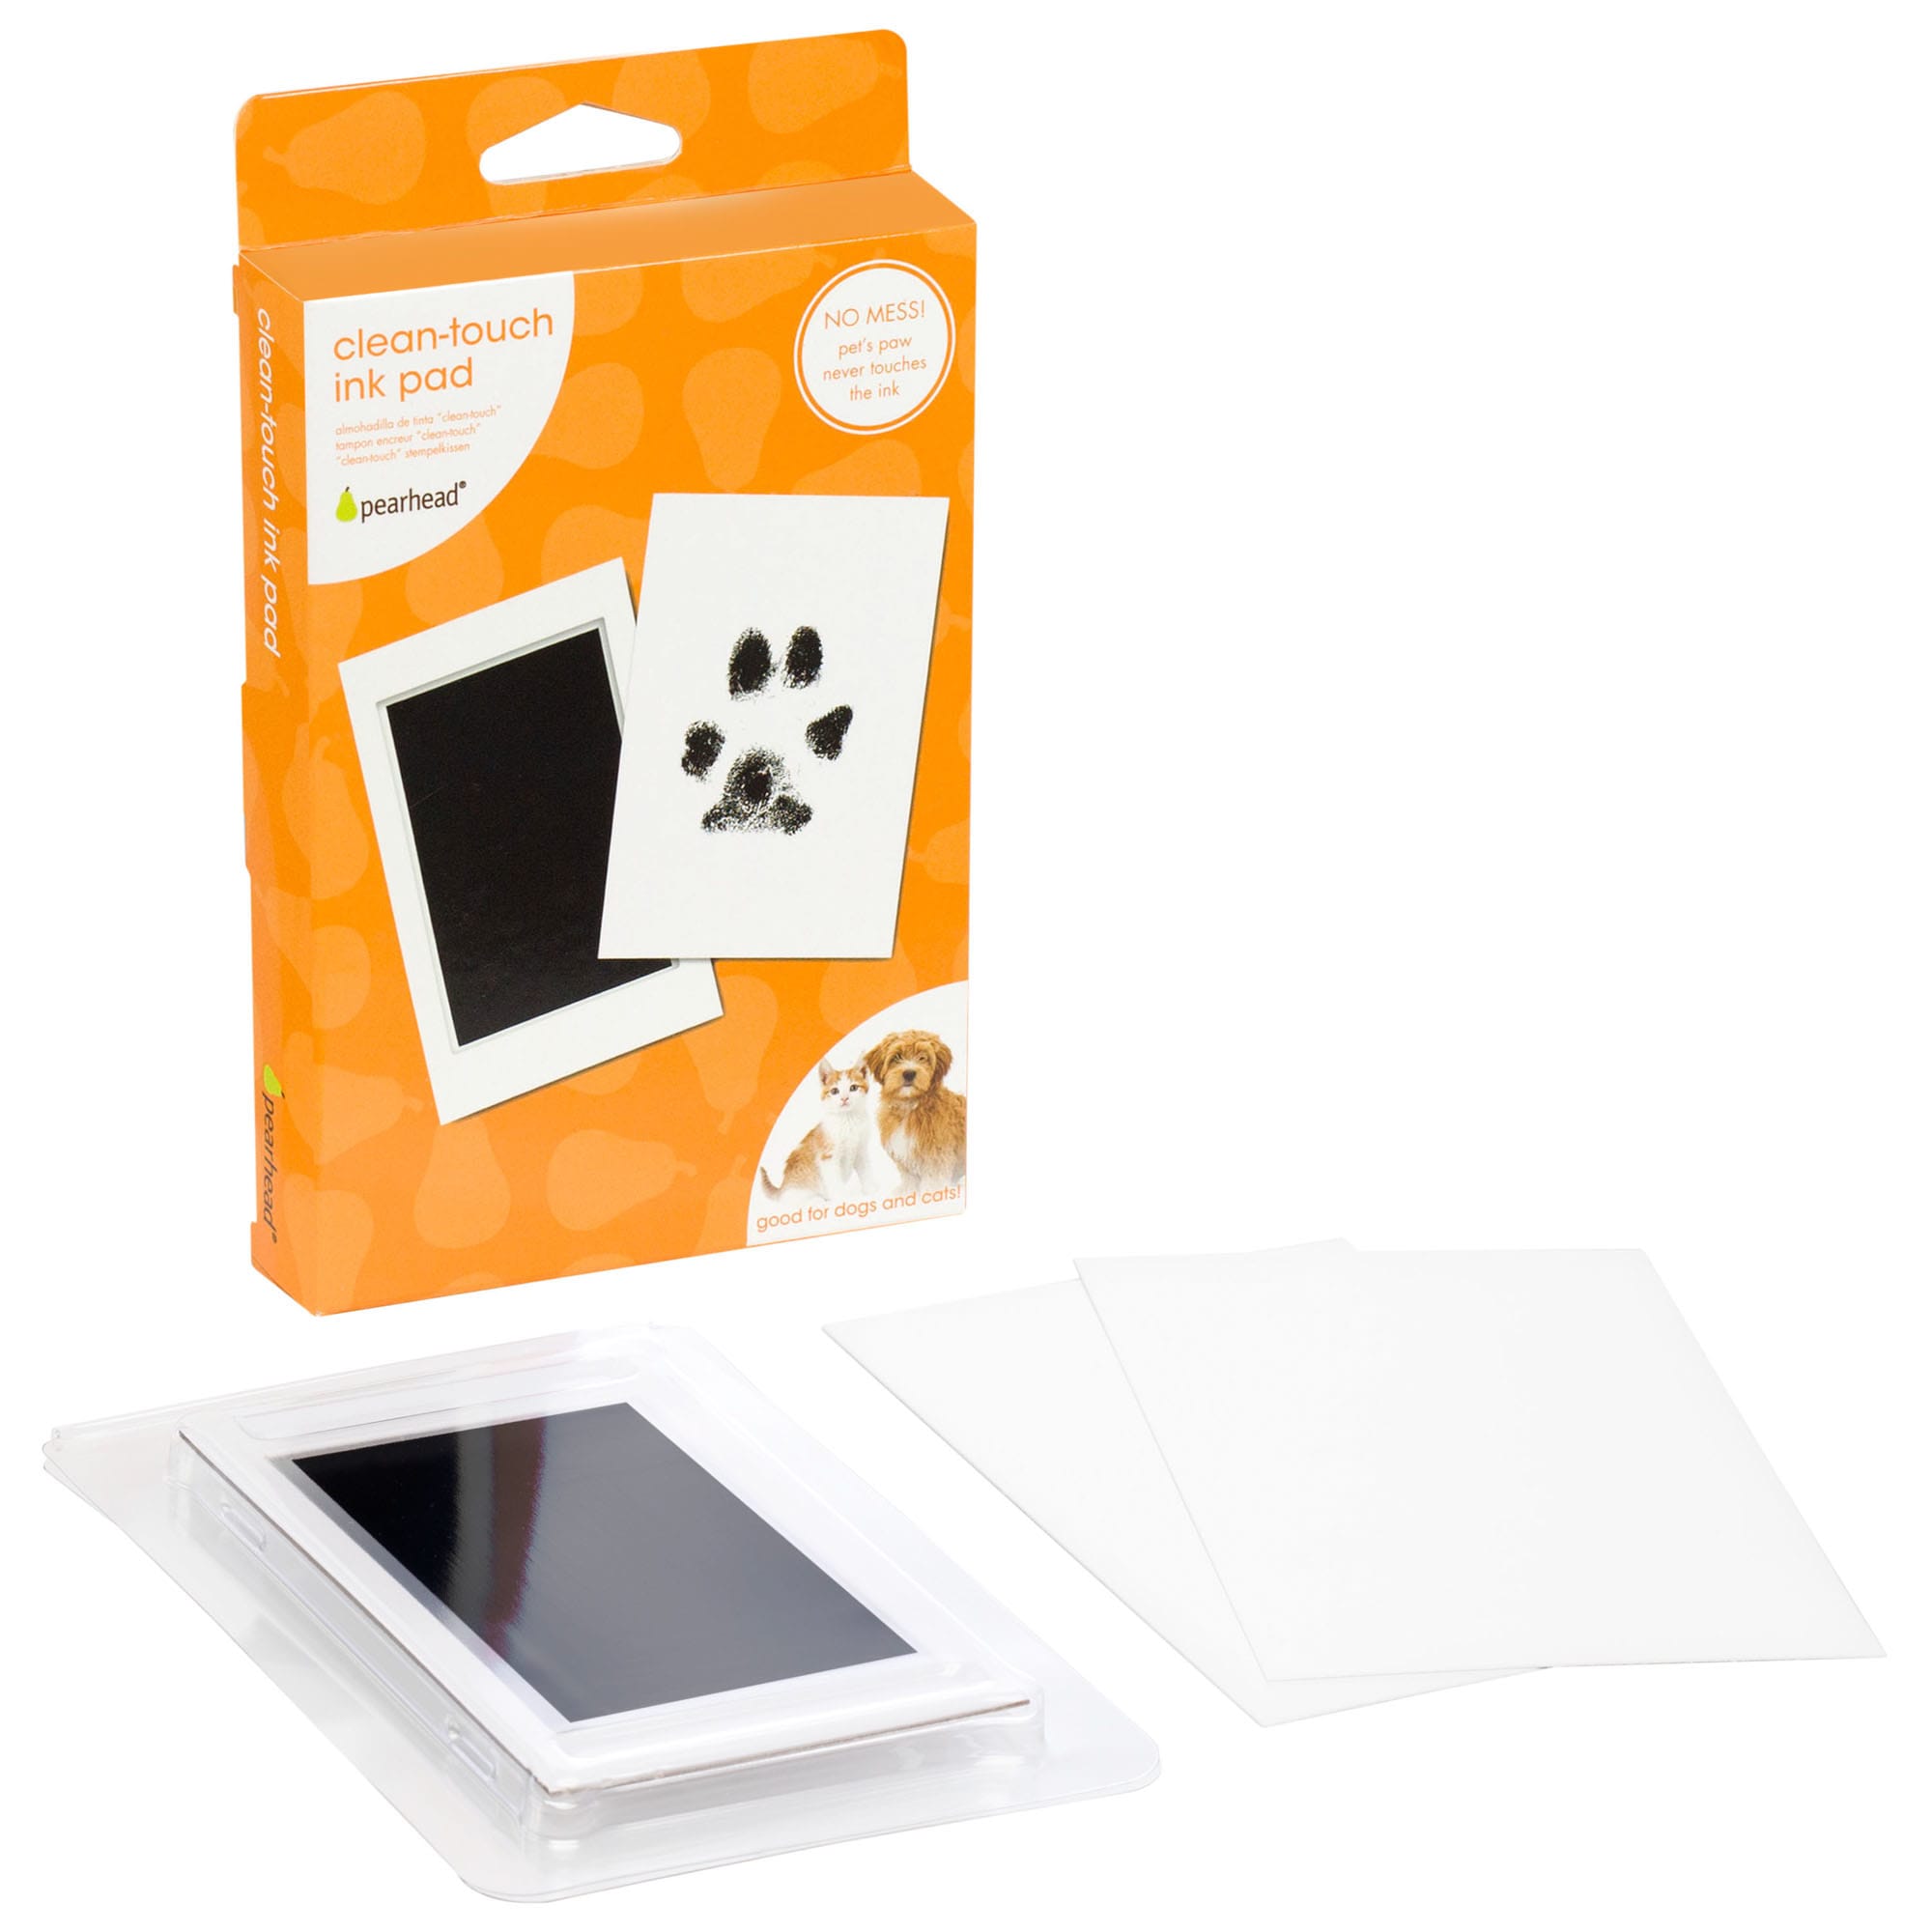 Any Erasure Comparison Pearhead Pet Pawprints Clean-Touch Ink Pad for Dogs and Cats | Petco